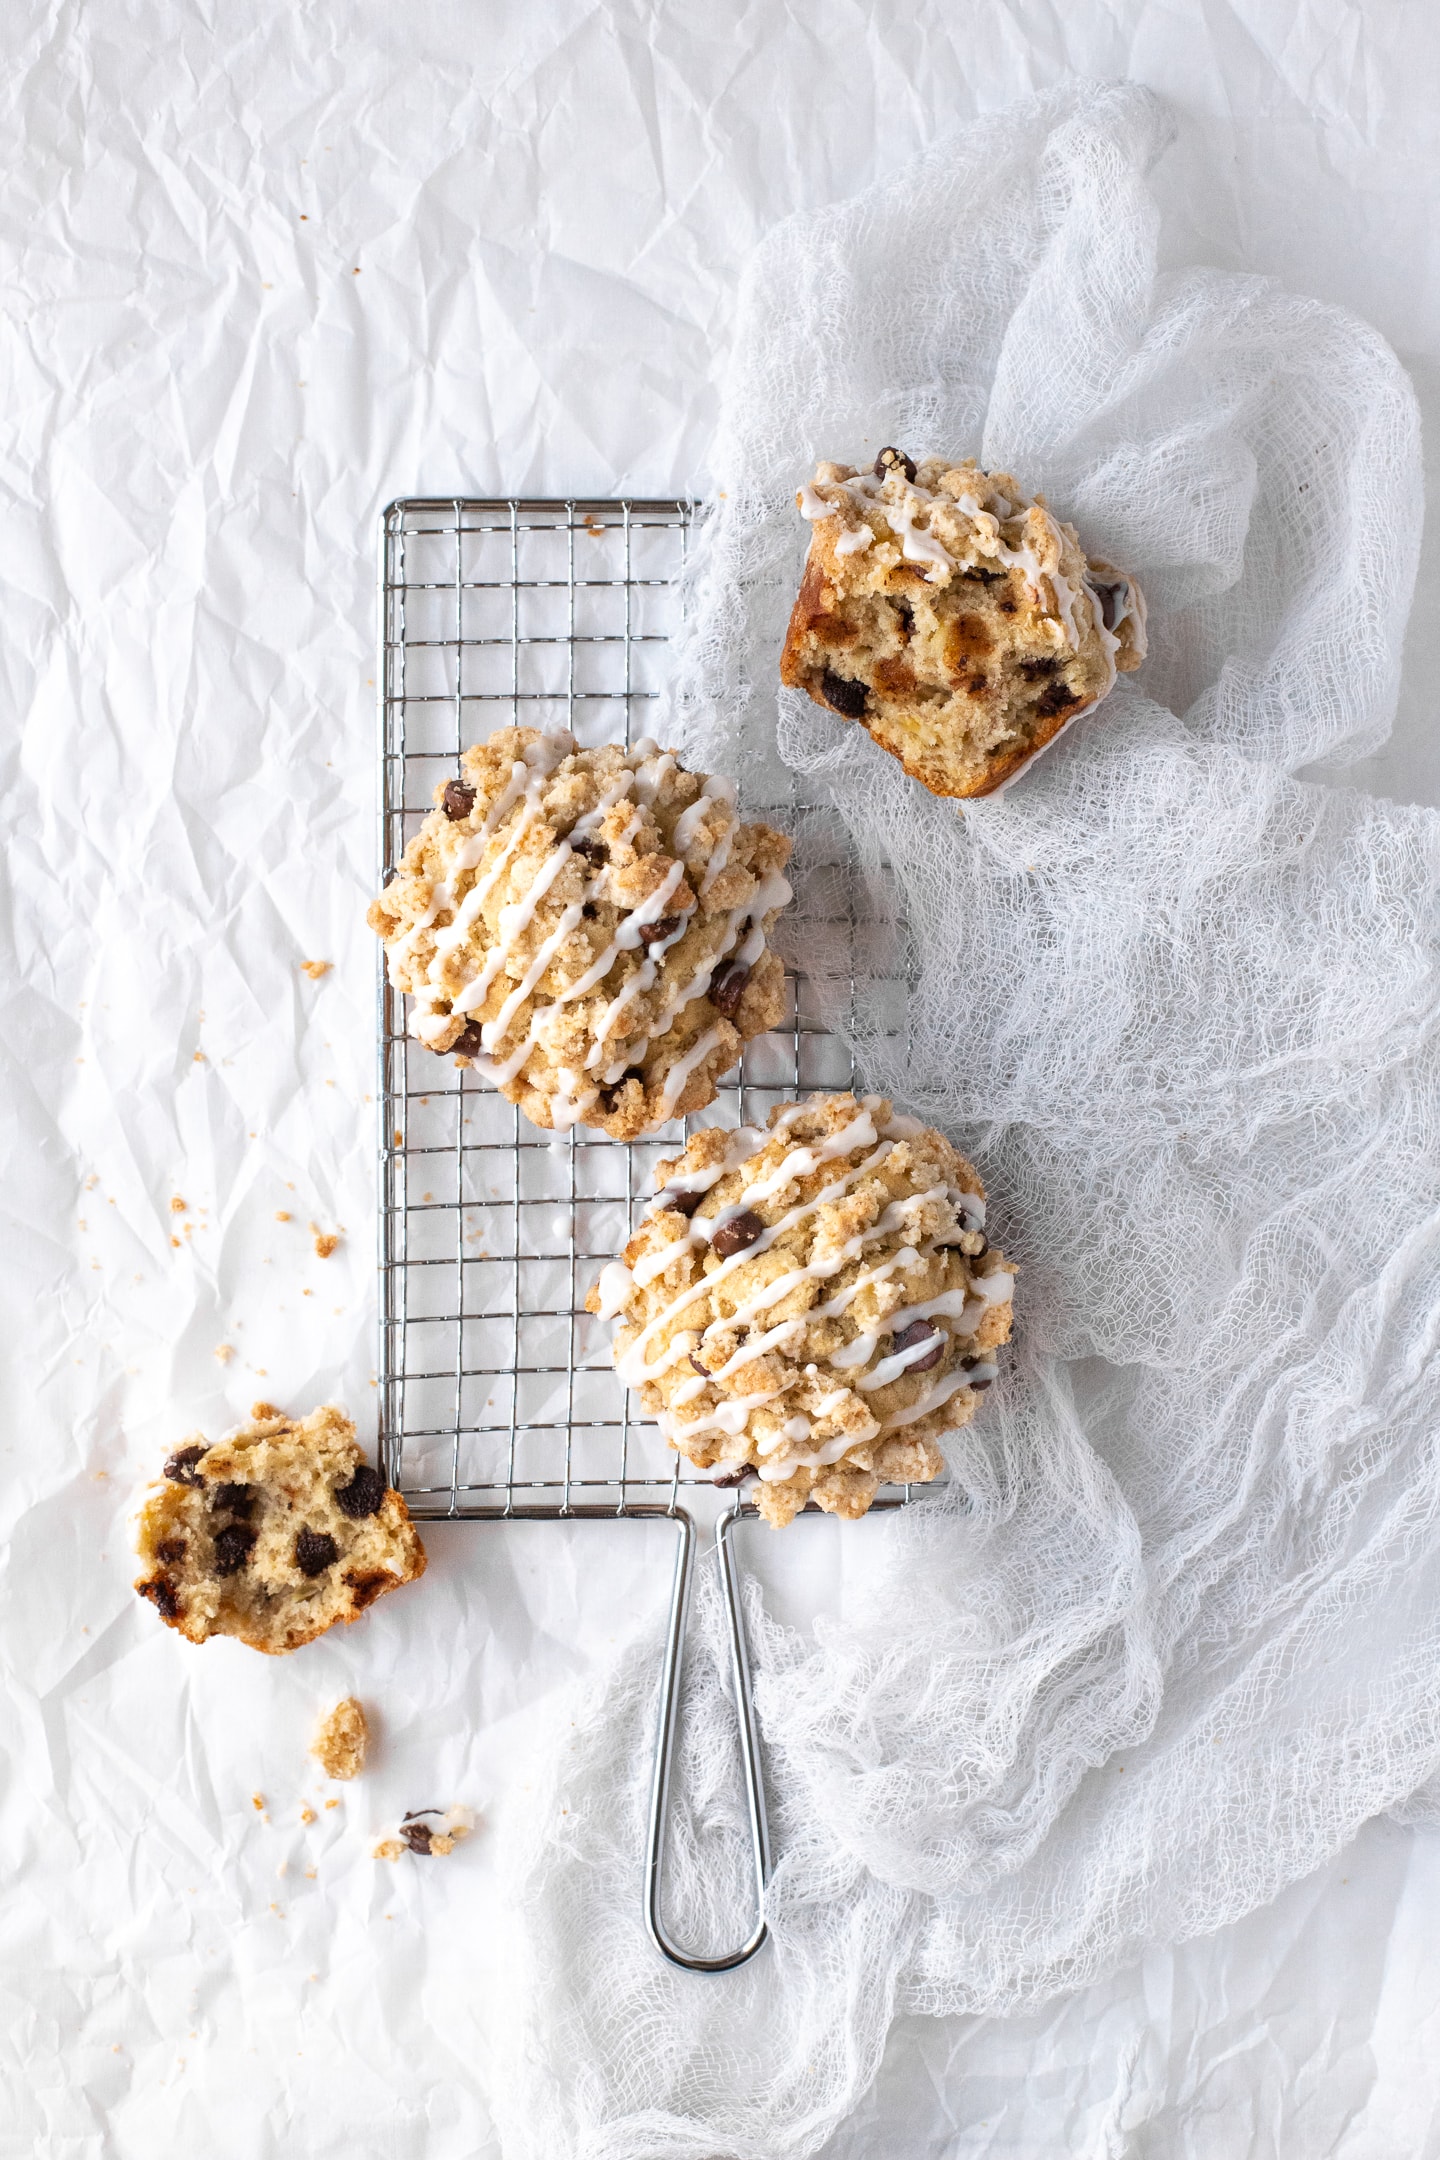 Overhead view of two whole muffins on top of a safety grater, with portions of a muffin scatter around the sides, over a white backdrop.